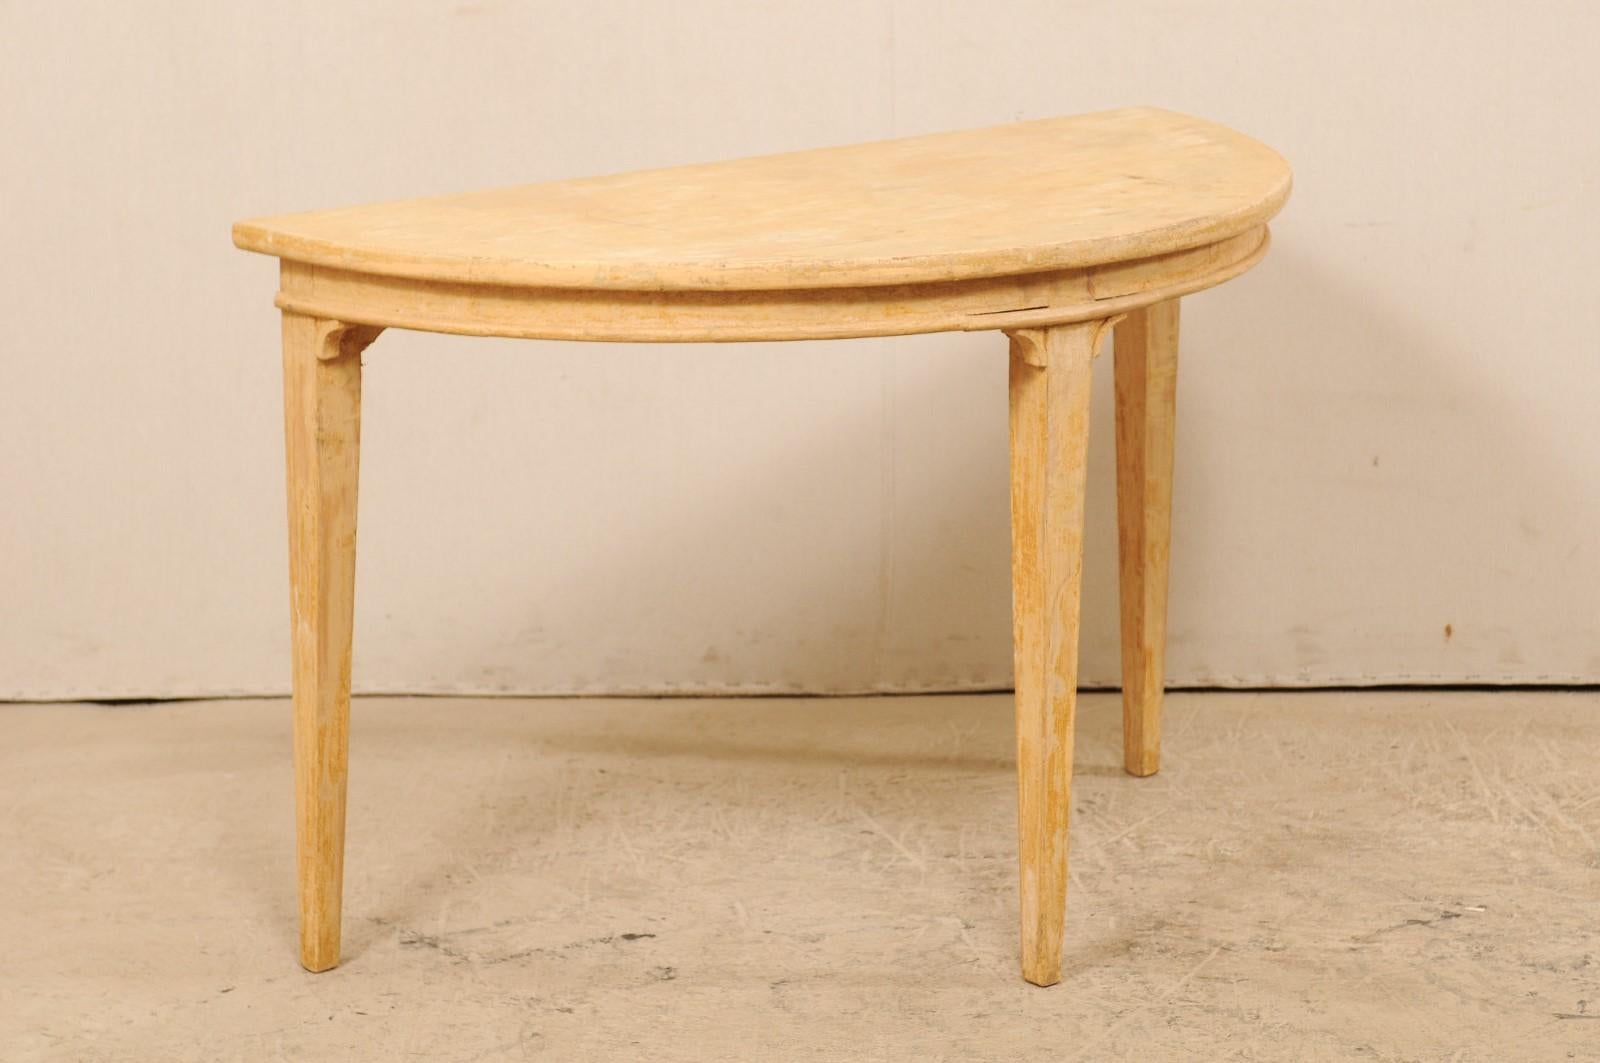 Single Swedish Demilune Light Wood Table from the 19th Century 3